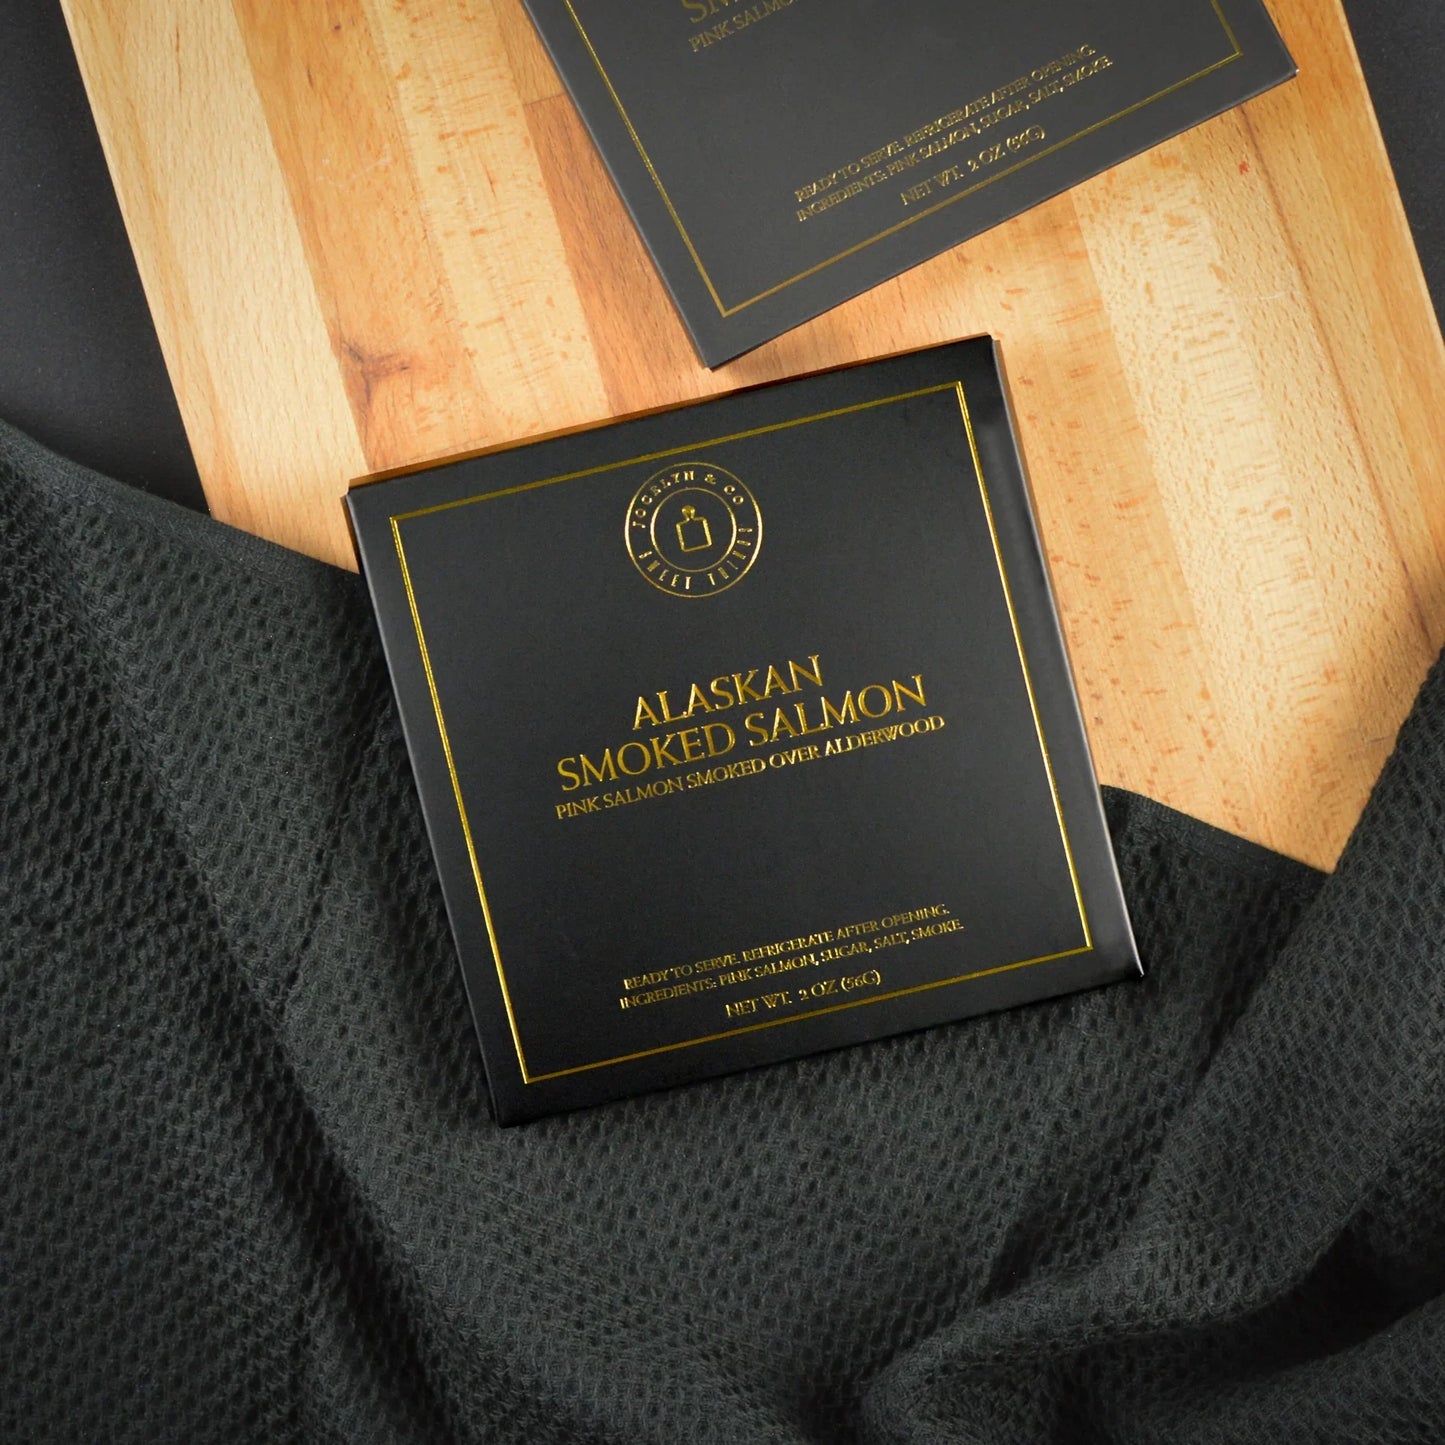 Private Label Packaging Only for Alaskan Smoked Salmon-500